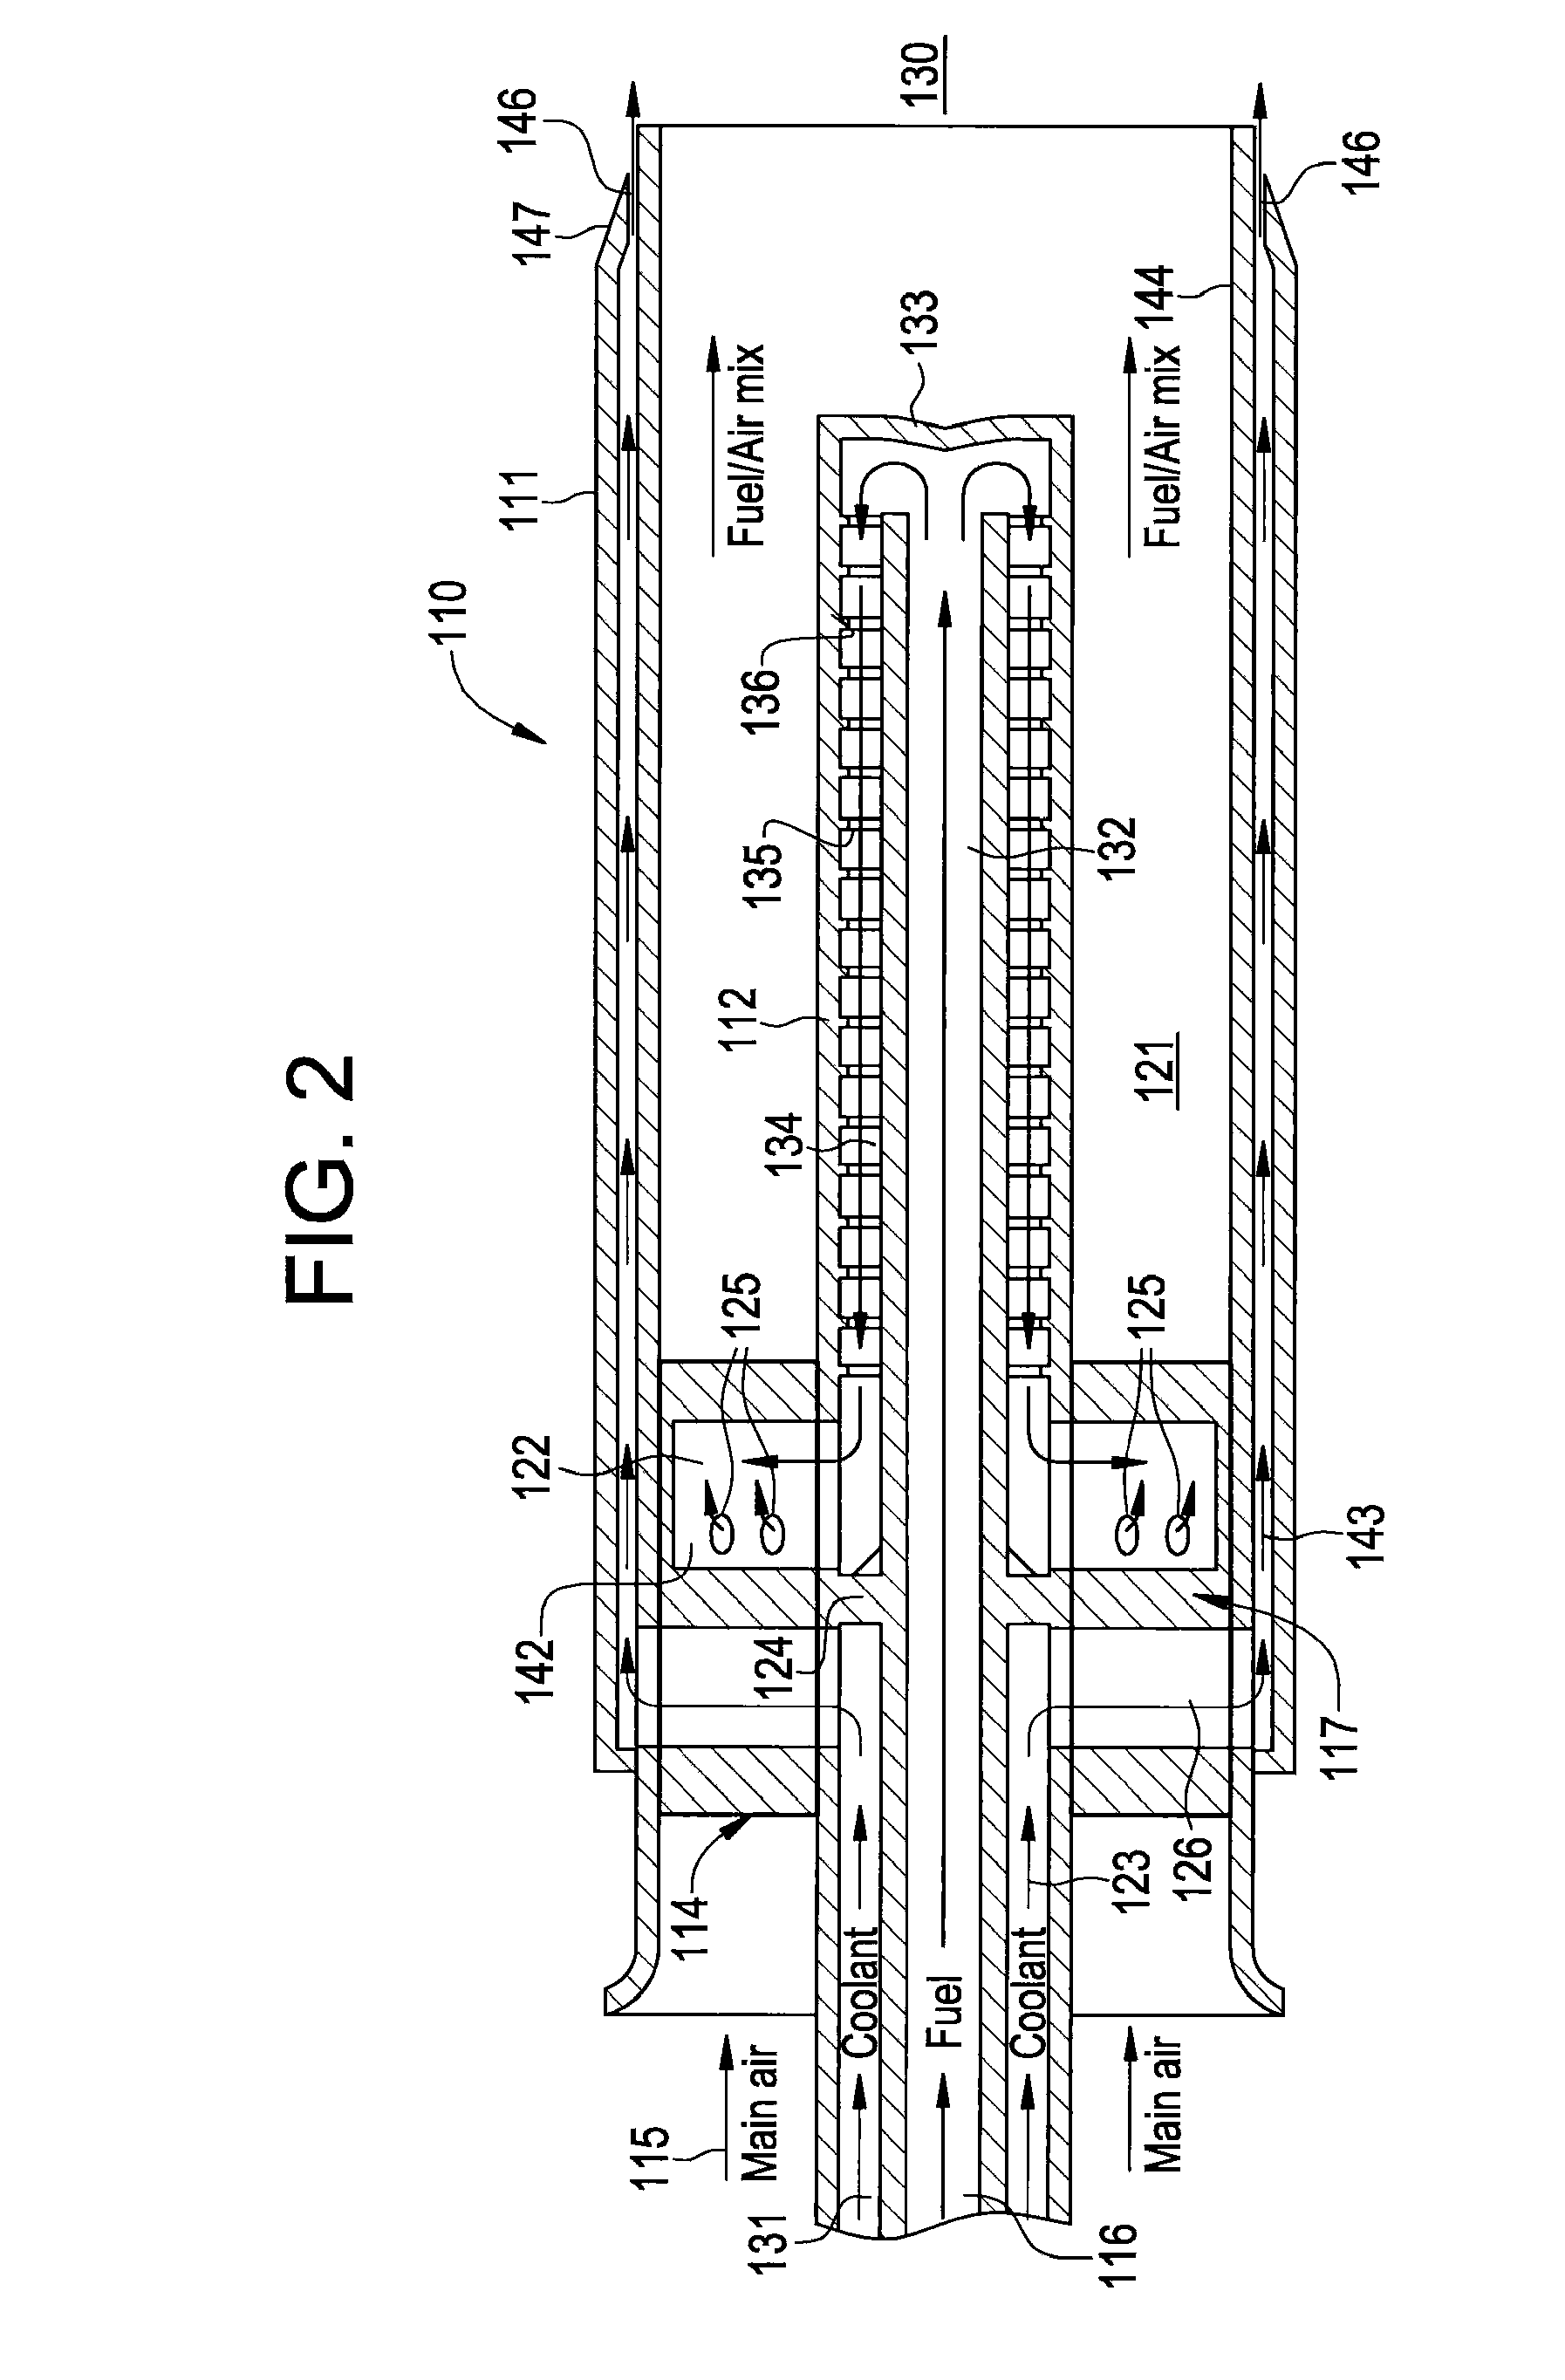 Flame holding tolerant fuel and air premixer for a gas turbine combustor